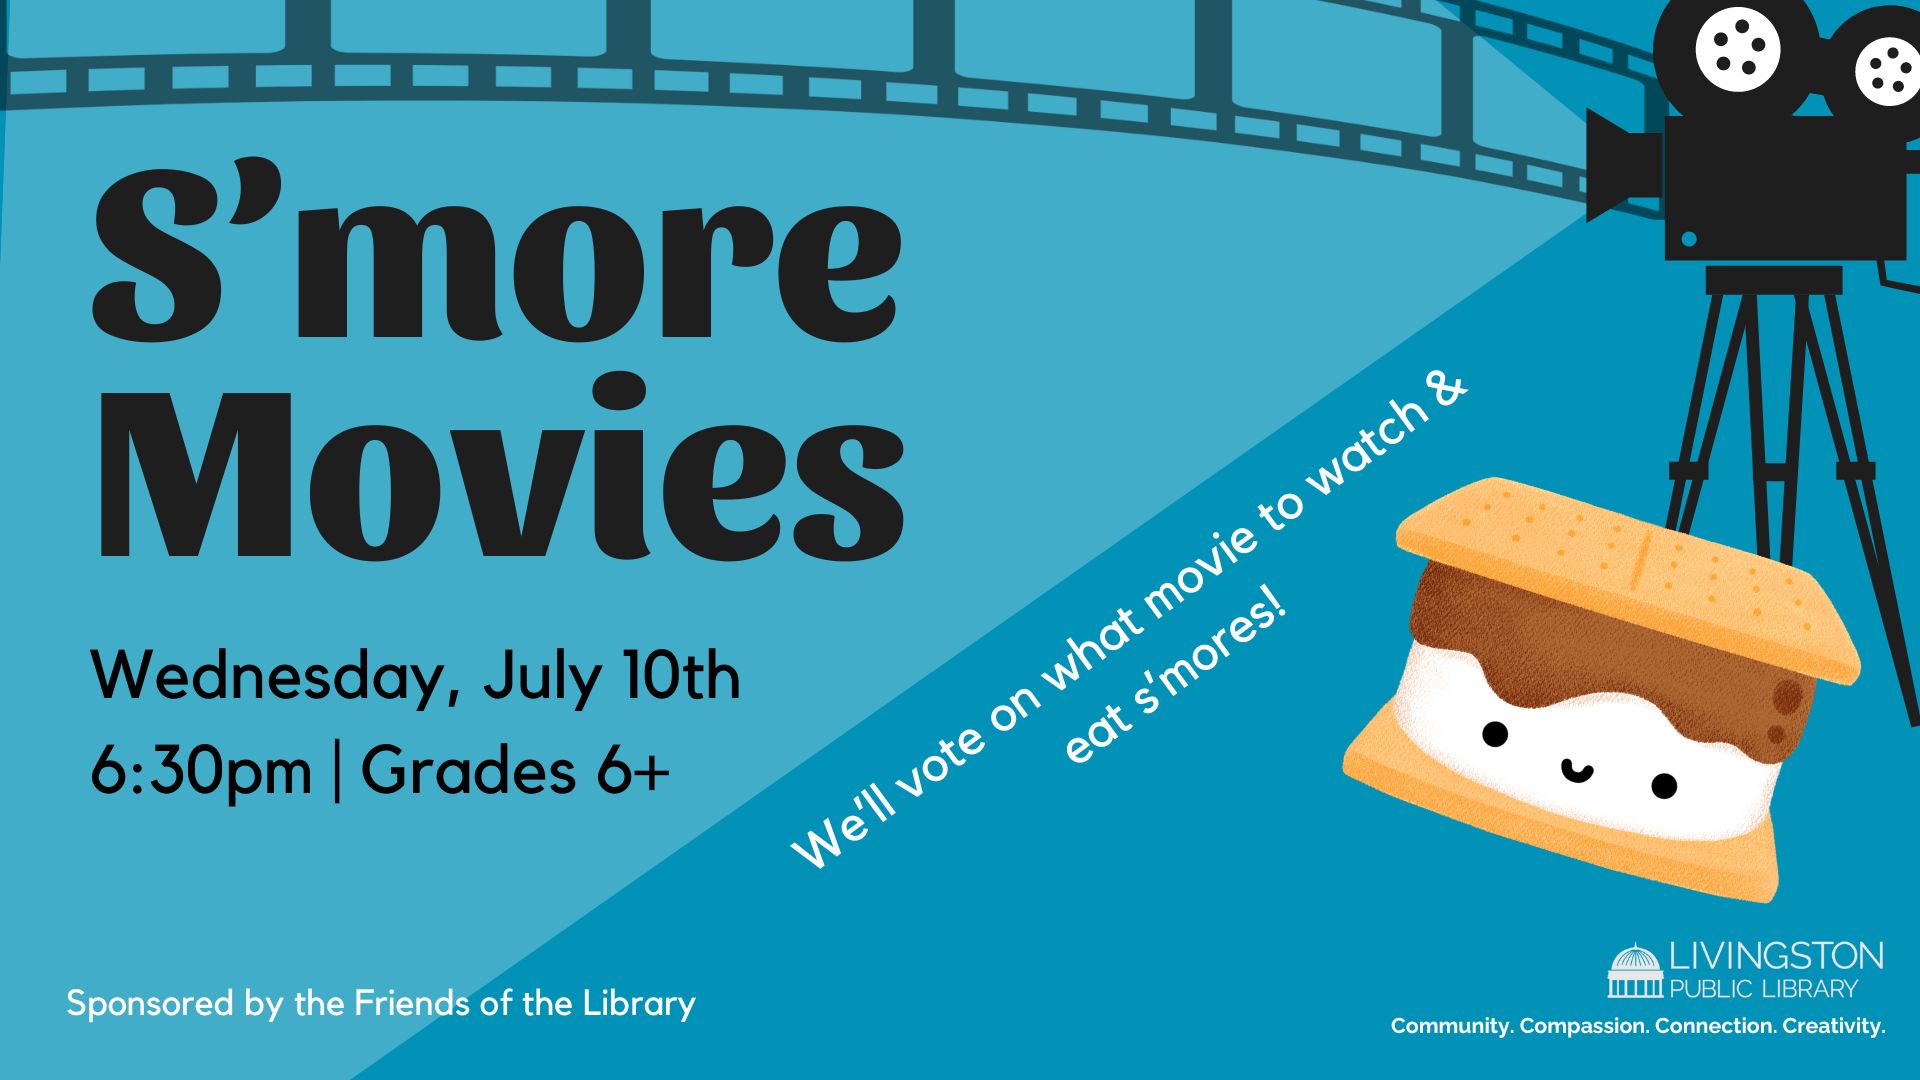 Blue background, black and white text. Image of cute s'more with a face. Image of a projection movie machine.